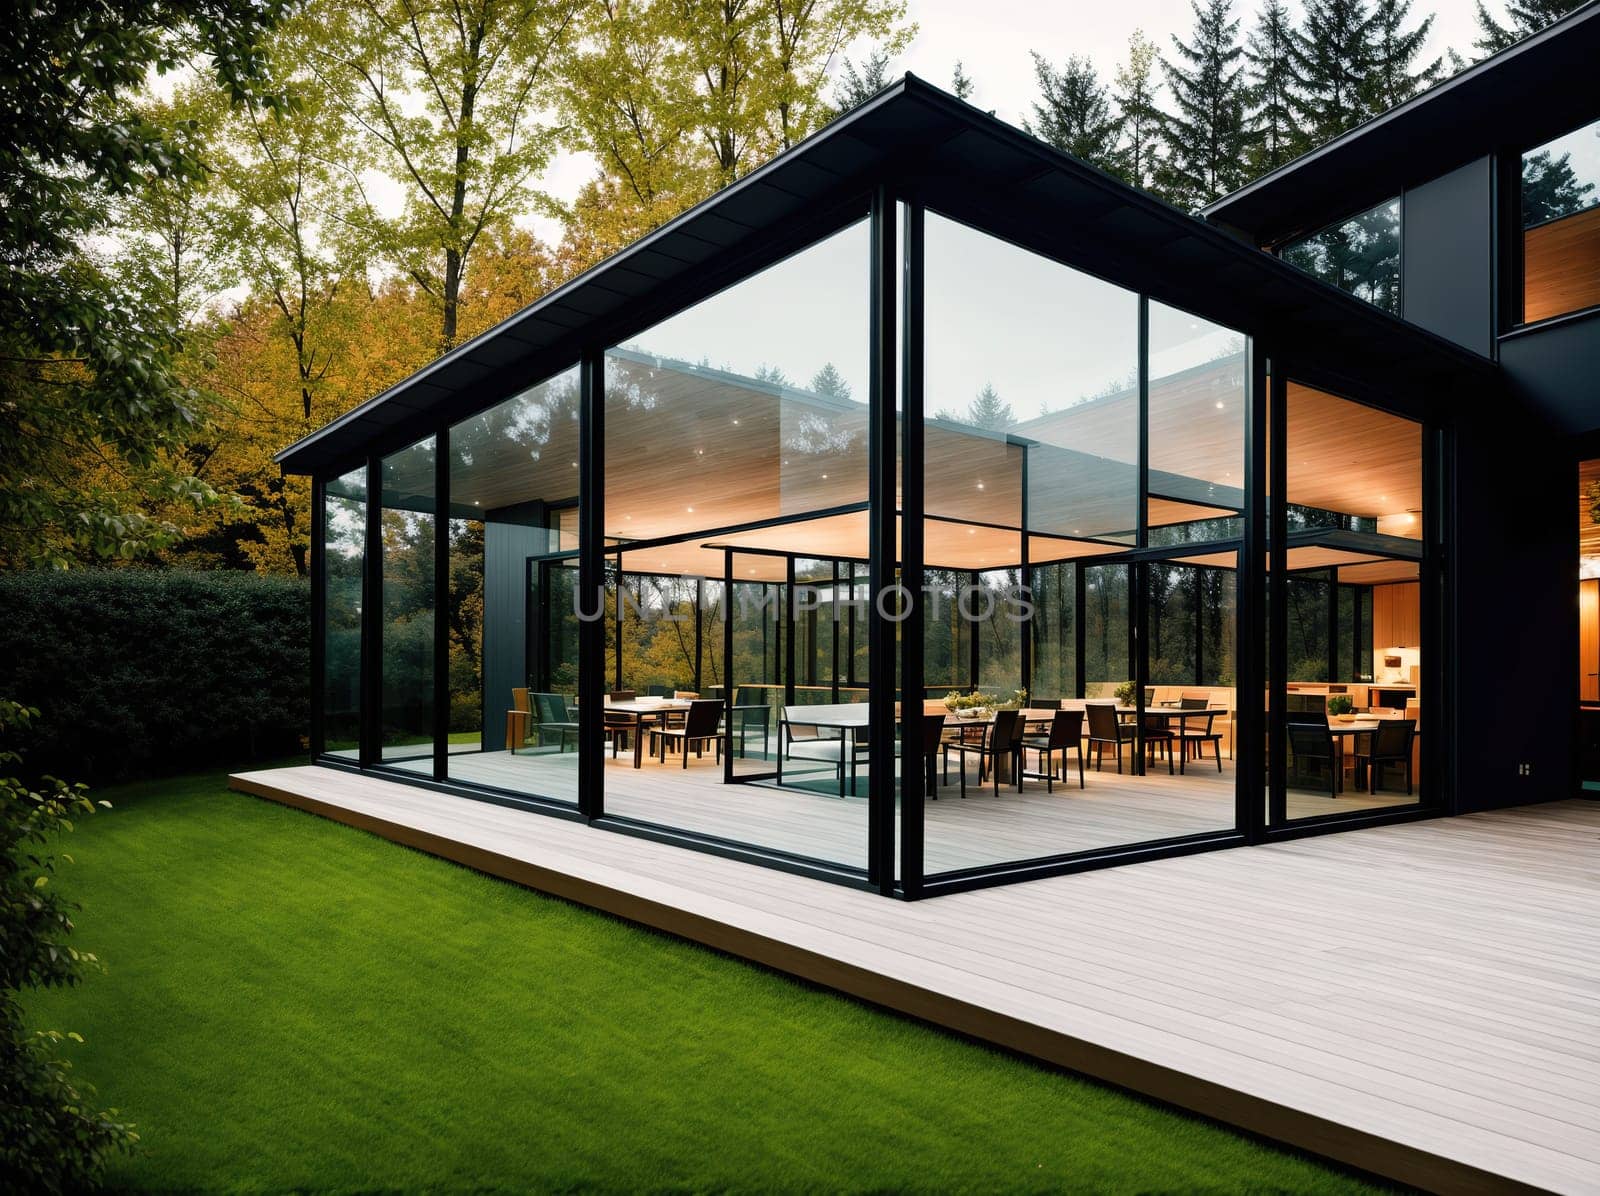 A modern glass-walled house with a spacious living room, dining room, and kitchen. by creart